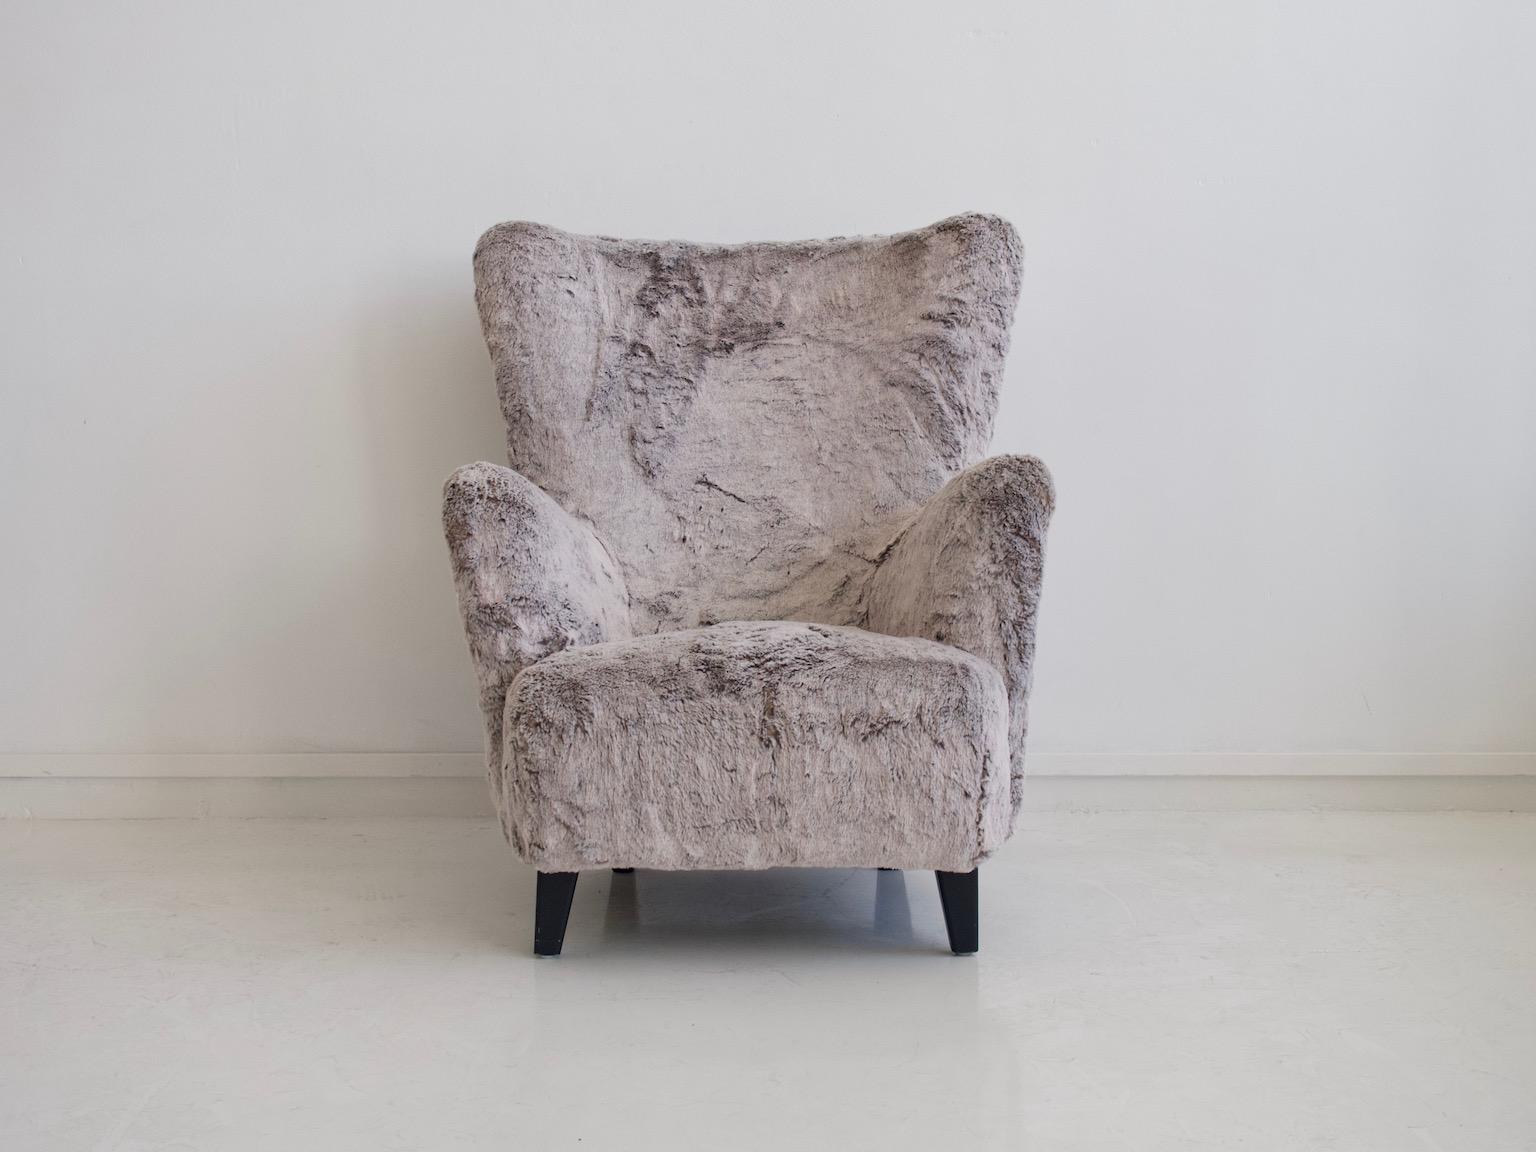 Armchair from the 1950s. Reupholstered with grey faux fur fabric. Legs made of stained wood. Very comfortable seat.